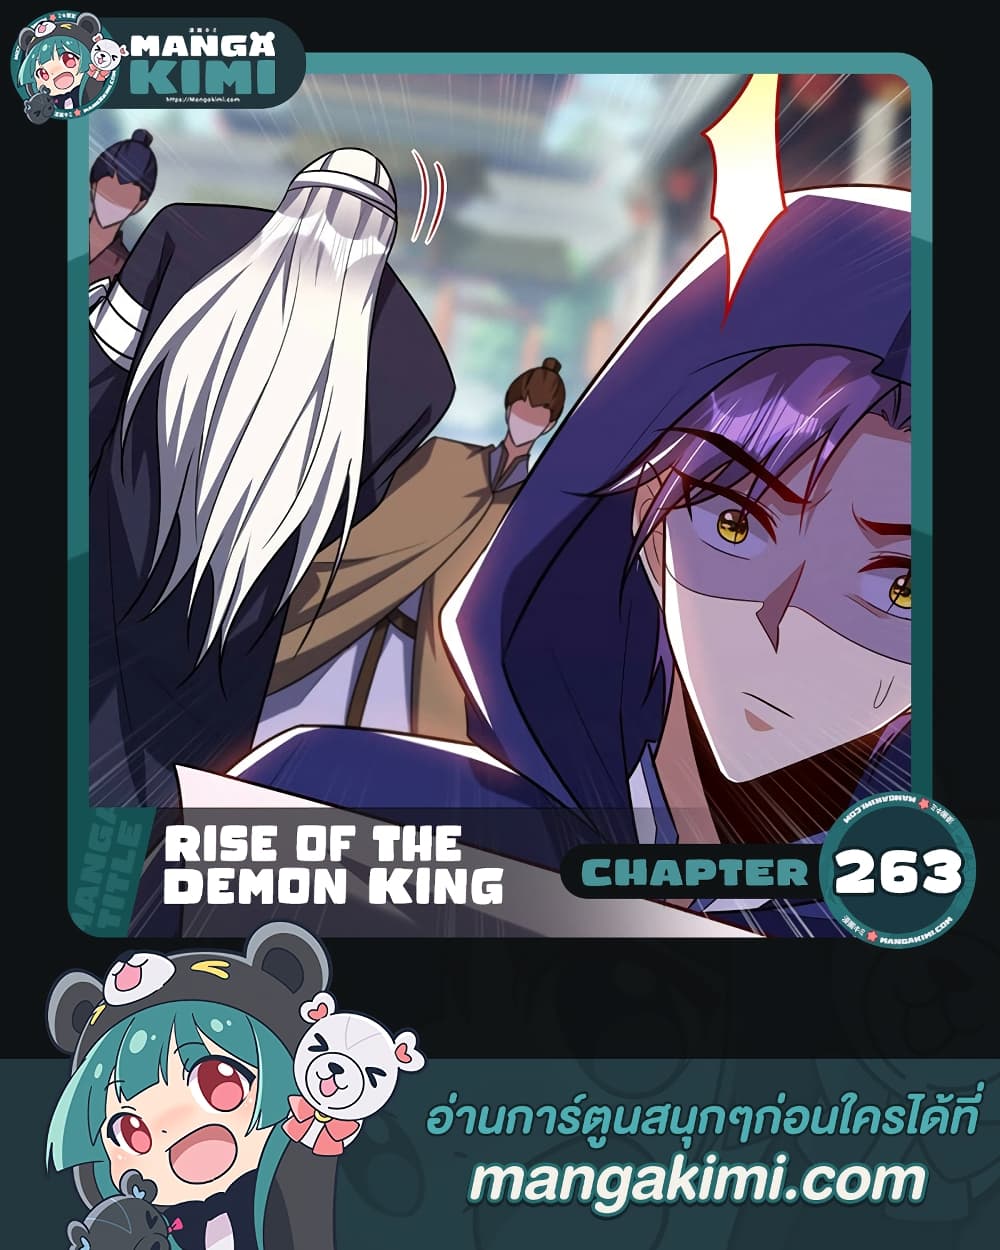 Rise of The Demon King เธฃเธธเนเธเธญเธฃเธธเธ“เนเธซเนเธเธฃเธฒเธเธฒเธเธตเธจเธฒเธ เธ•เธญเธเธ—เธตเน 263 (1)